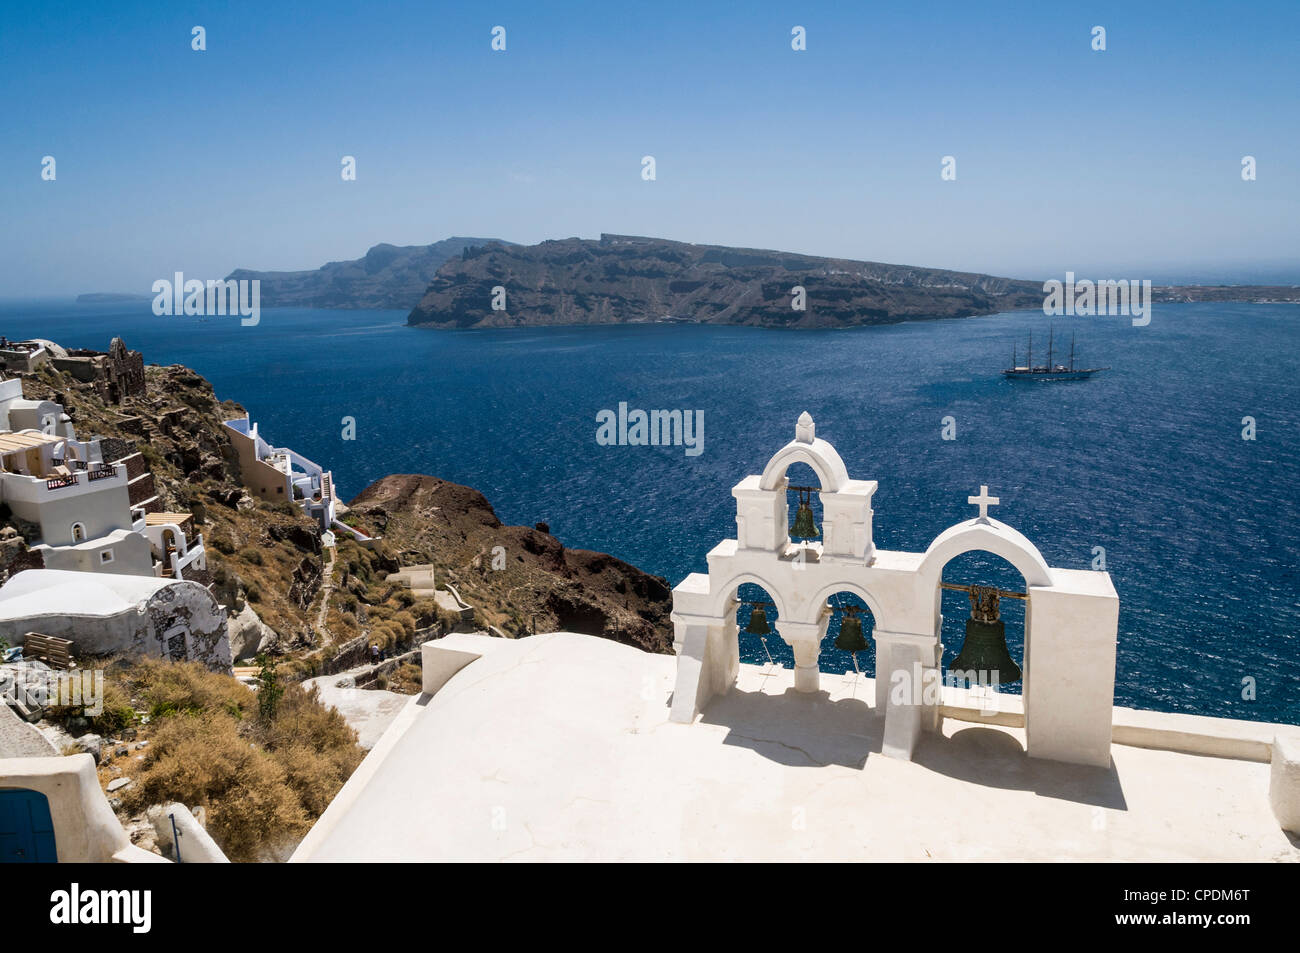 Bells of a Church in a village on the Greek Island of Santorini, Greece with a view of the caldera Stock Photo